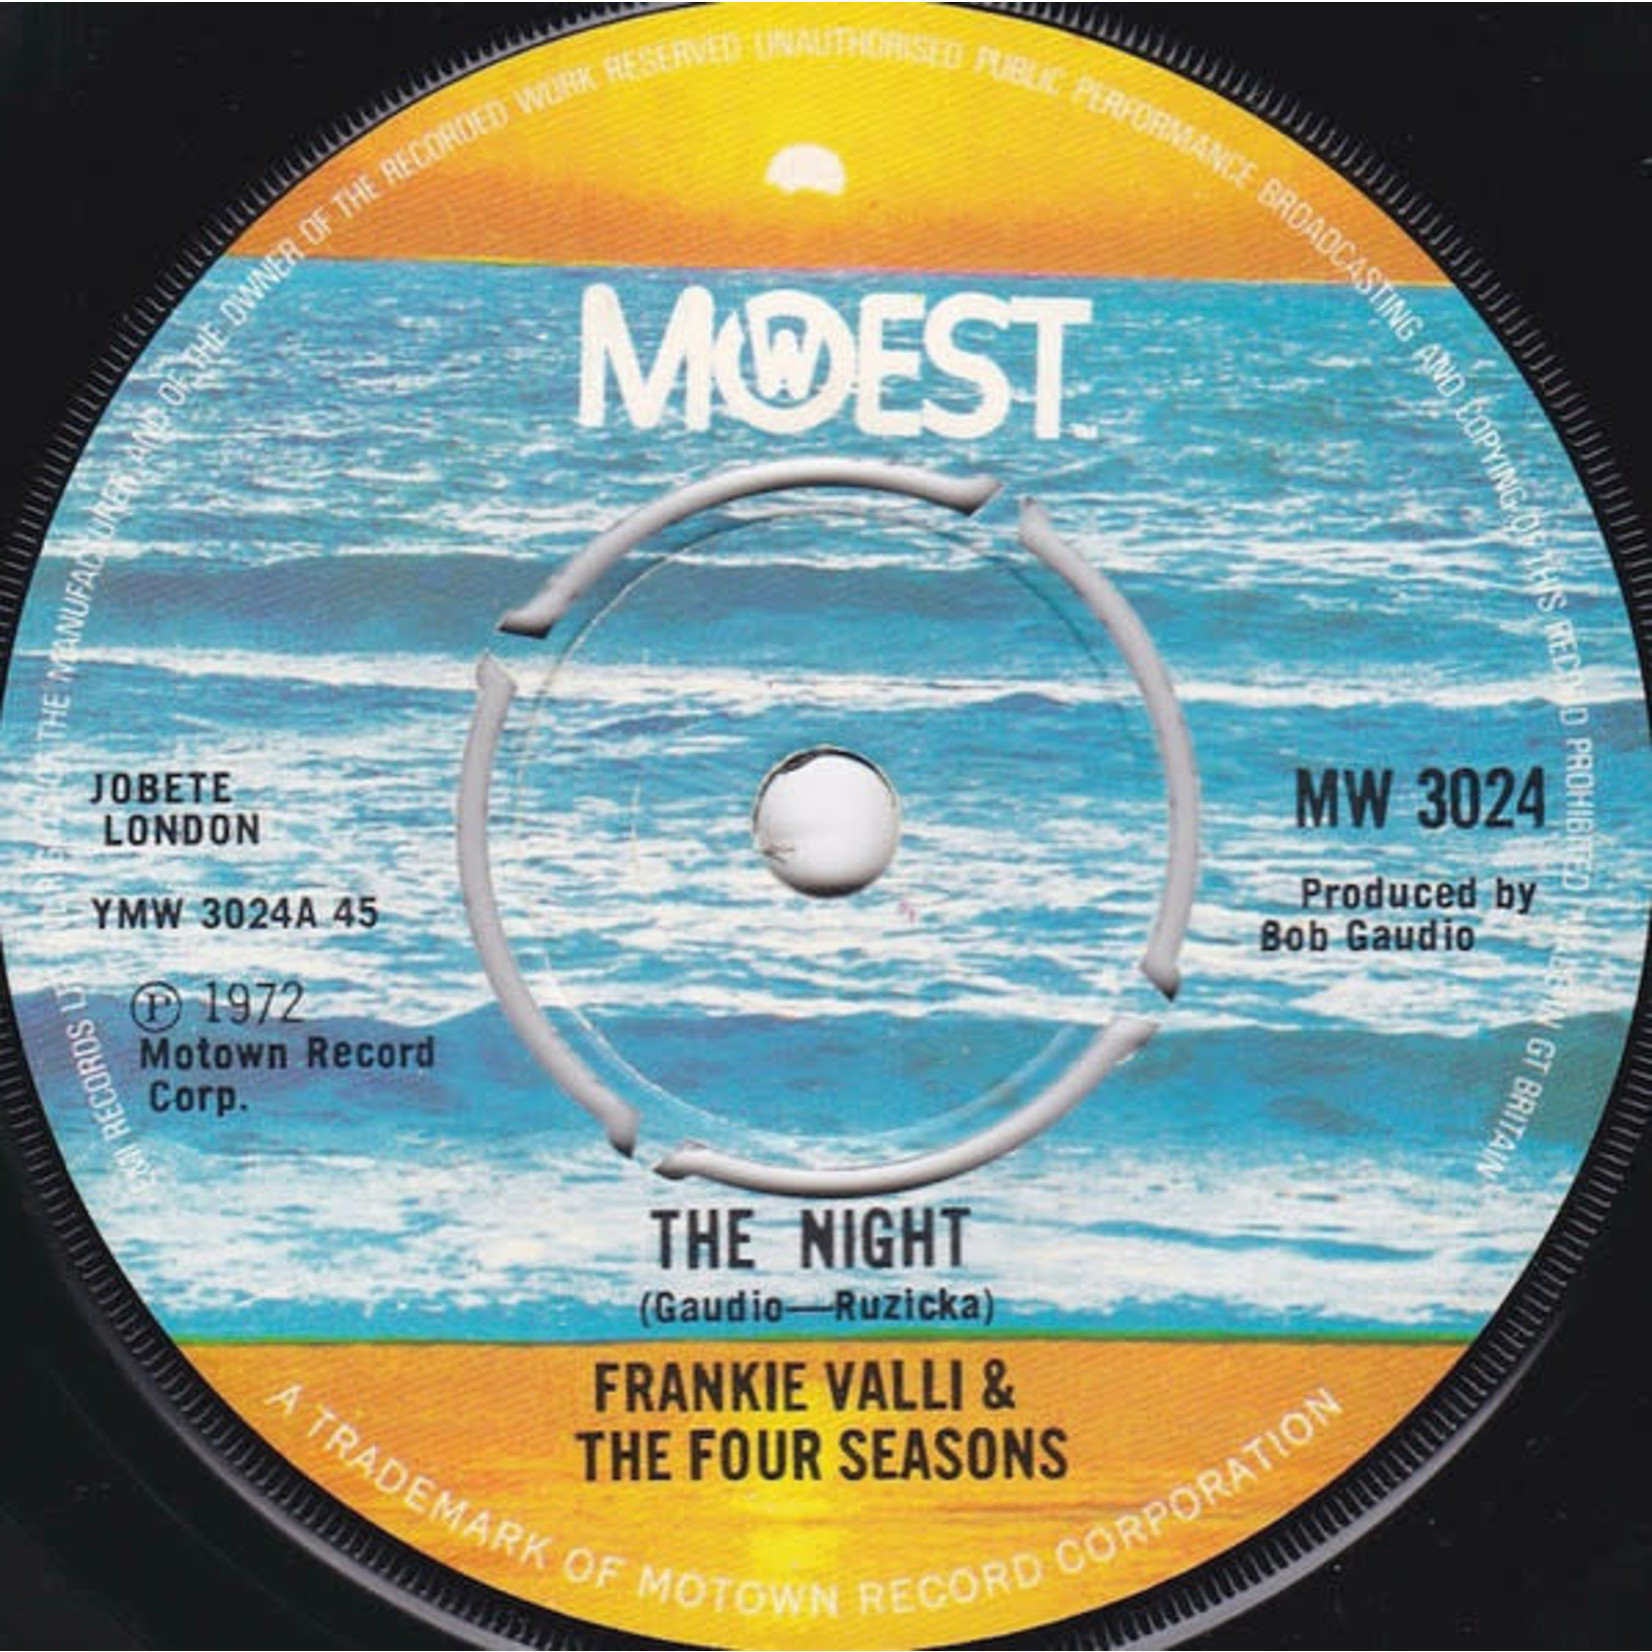 [7"] Frankie Valli & The Four Seasons - The Night b/w When The Morning Comes (7", 1975 UK, 4-Prong Centre, Disc VG)